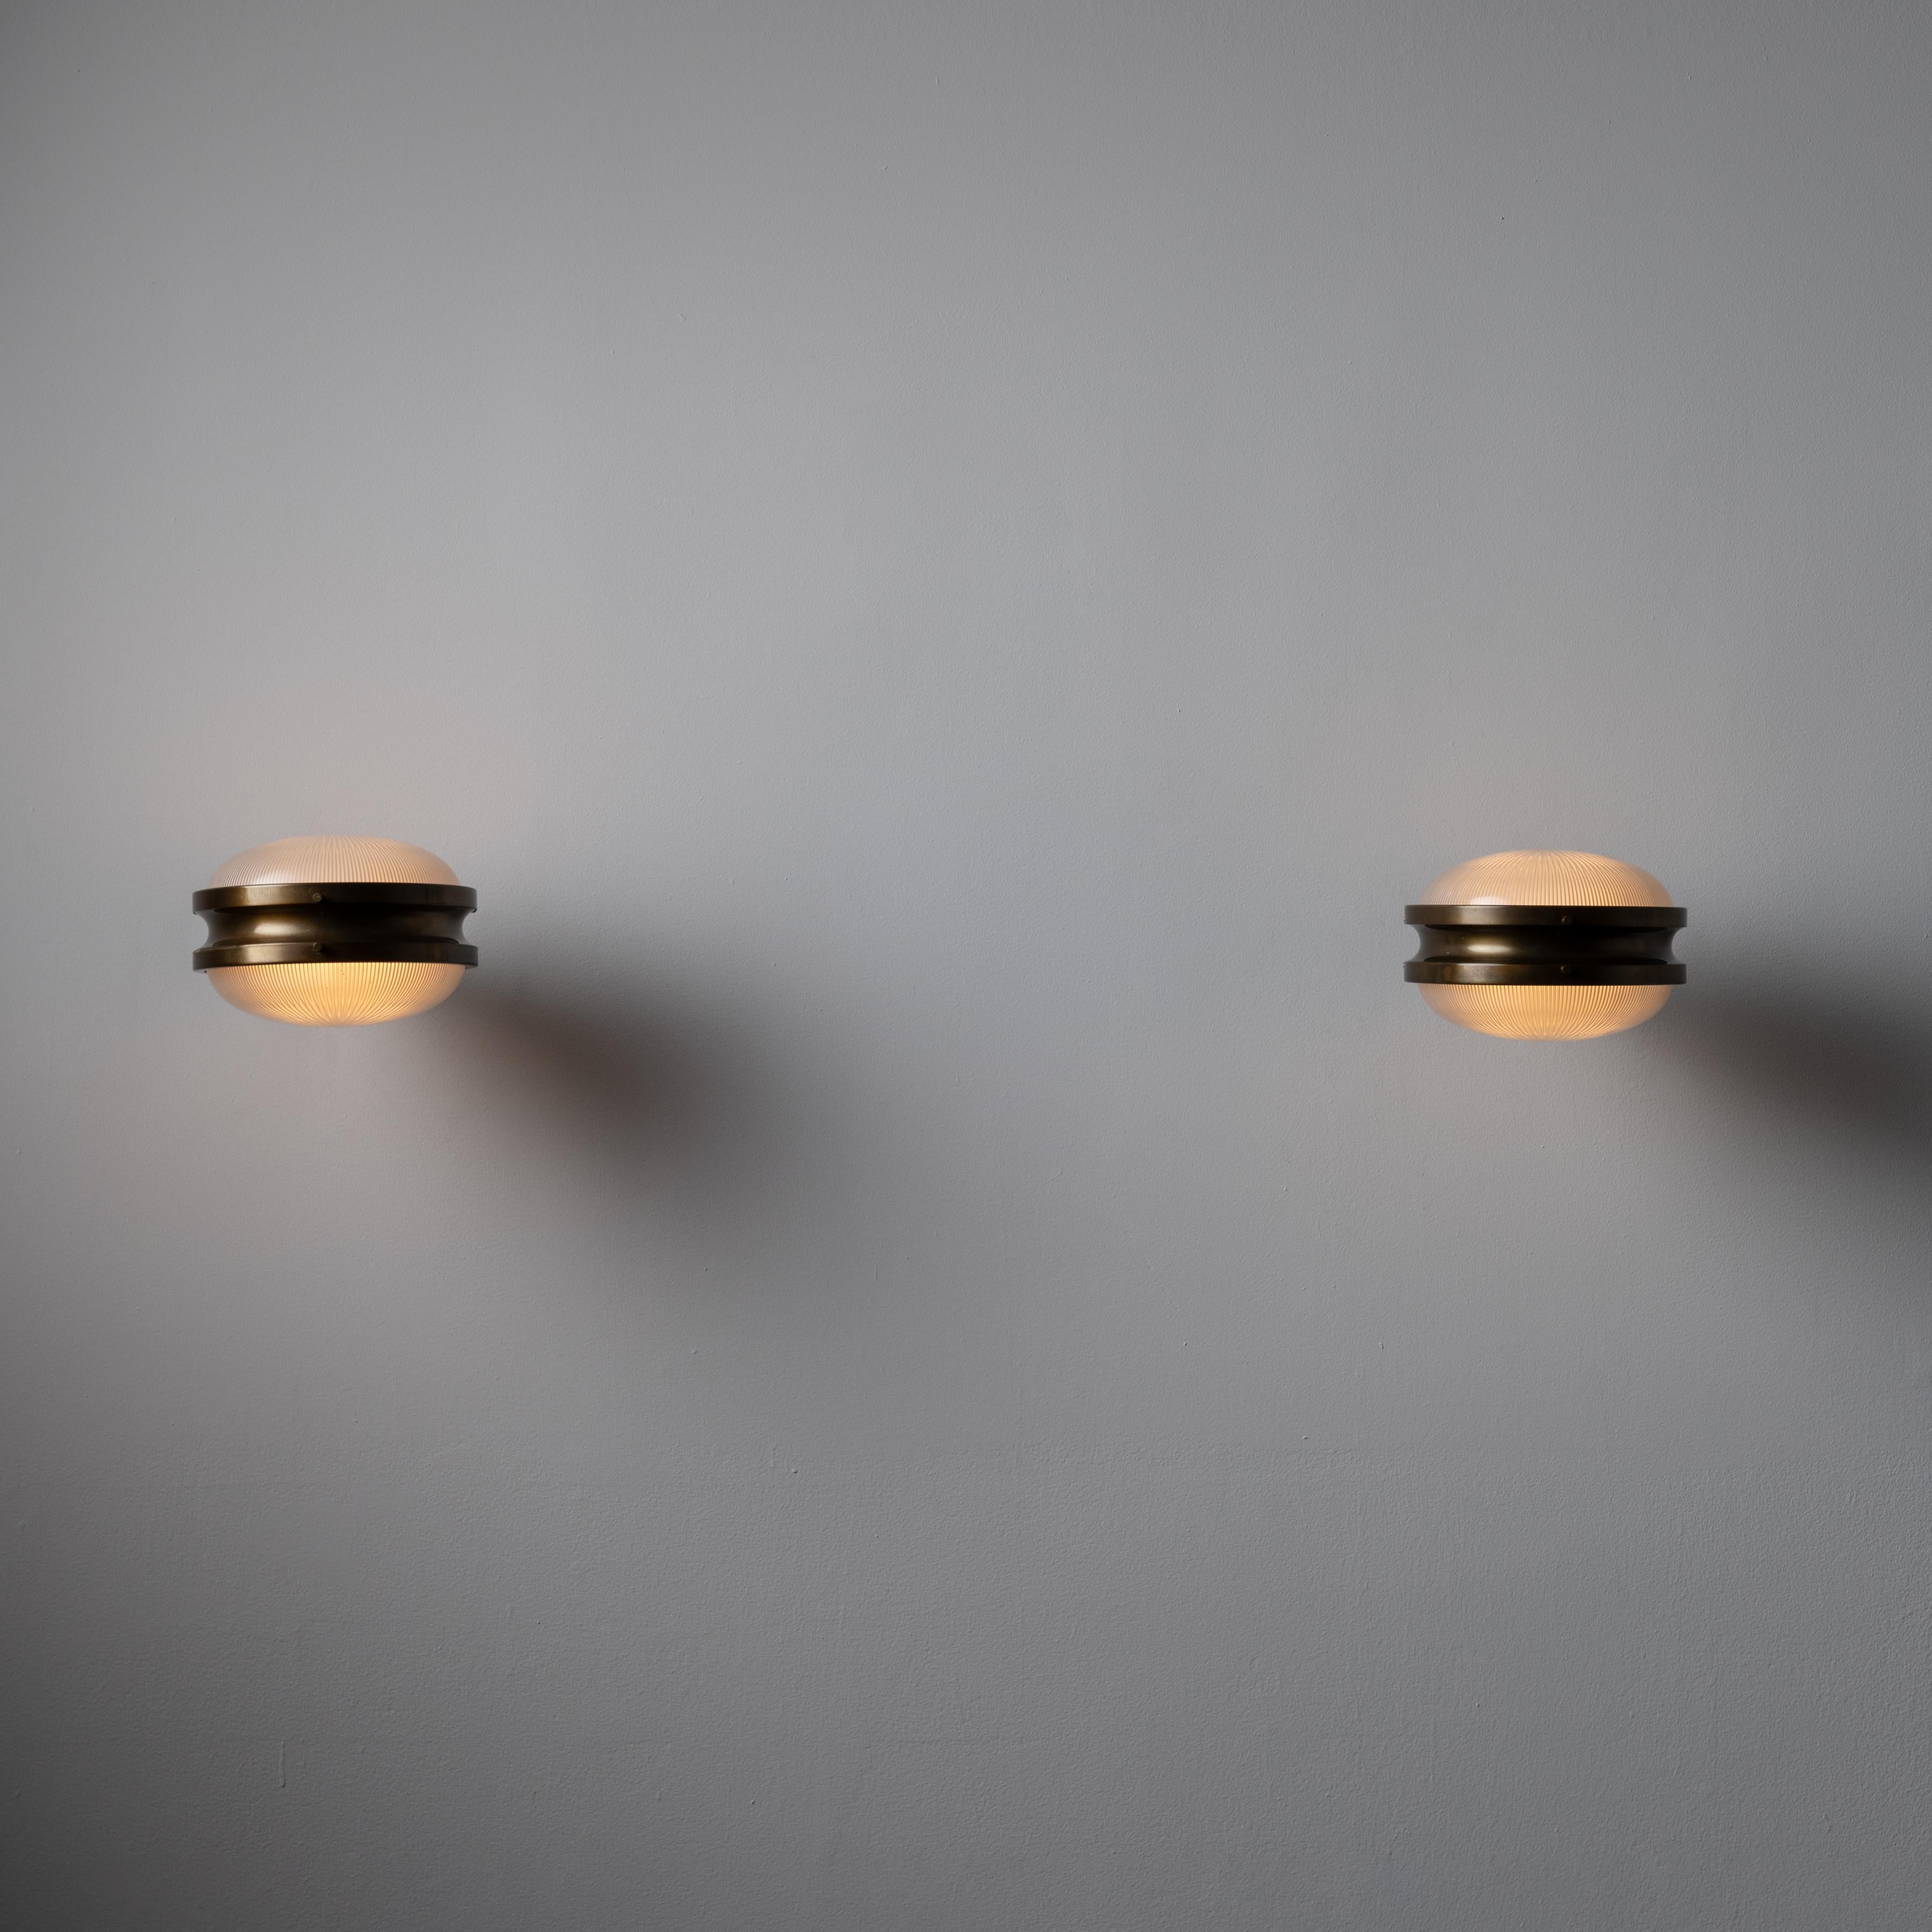 Pair of “Gamma” Sconces by: Sergio Mazza for Artemide. Designed and manufactured in Italy, 1962. Brass and reeded glass. Rewired for U.S. standards. We recommend one 40w maximum bulb per fixture. Bulbs are not included. Sold as a set.